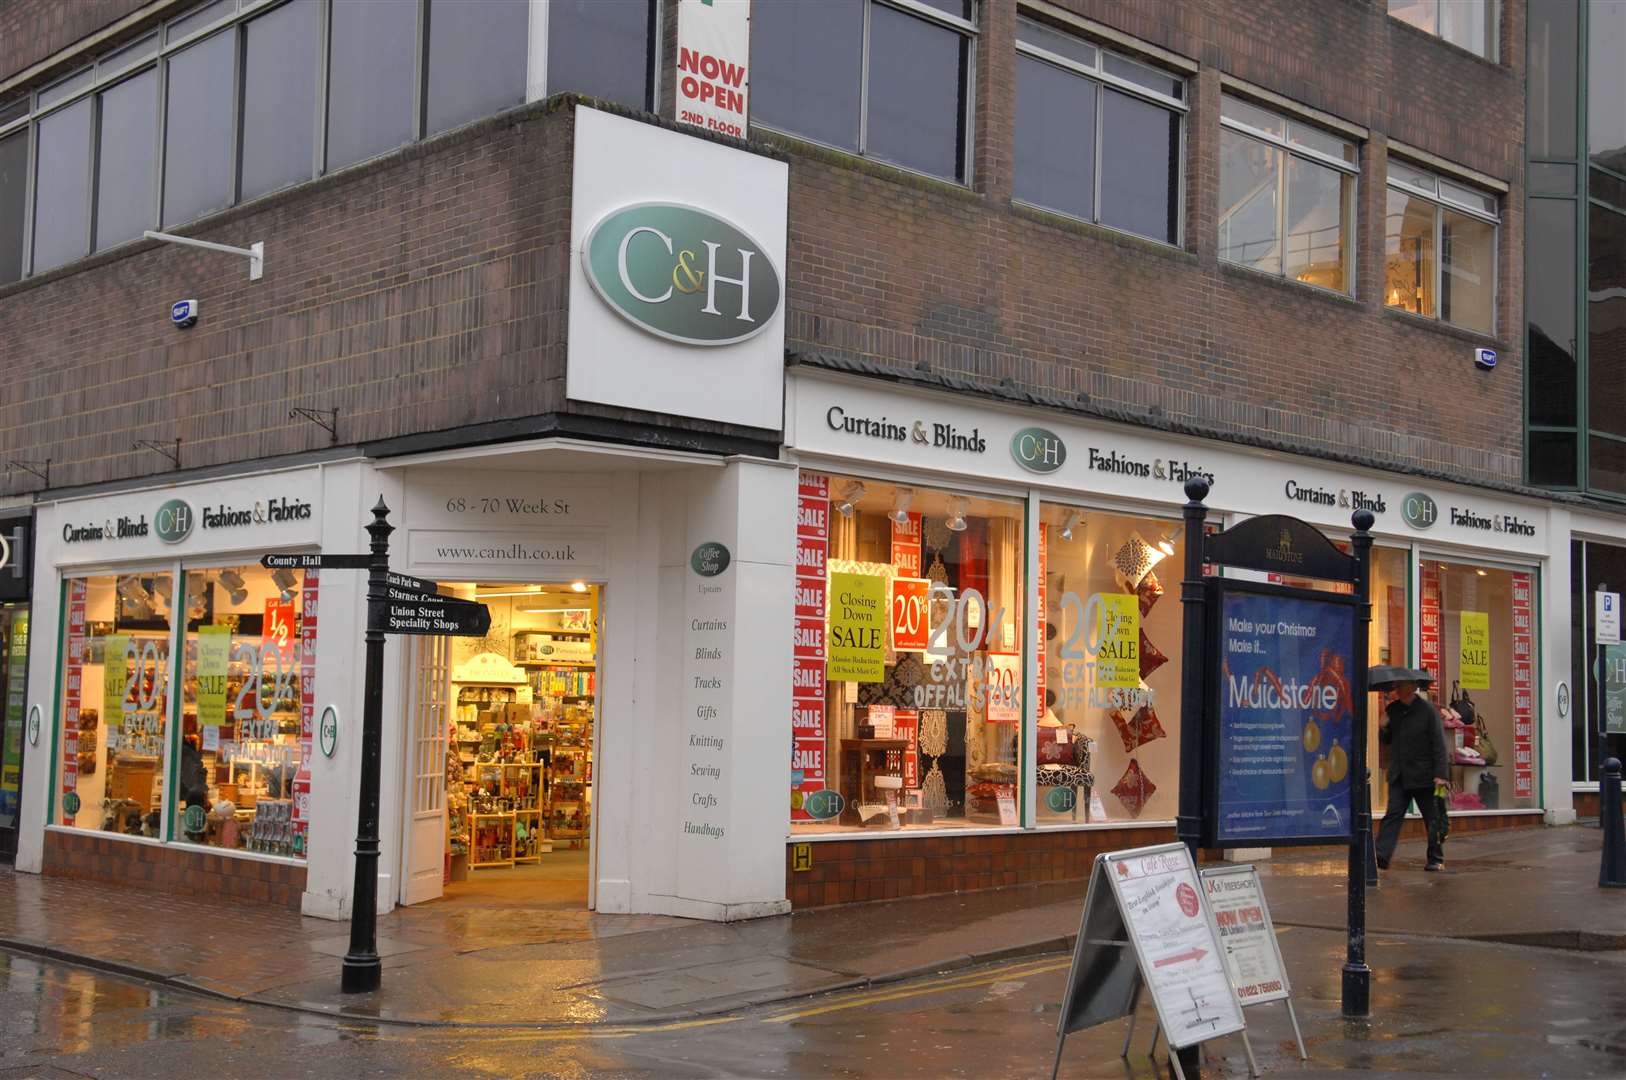 C&H Fabrics in Week Street, in January 2011, before it closed in March